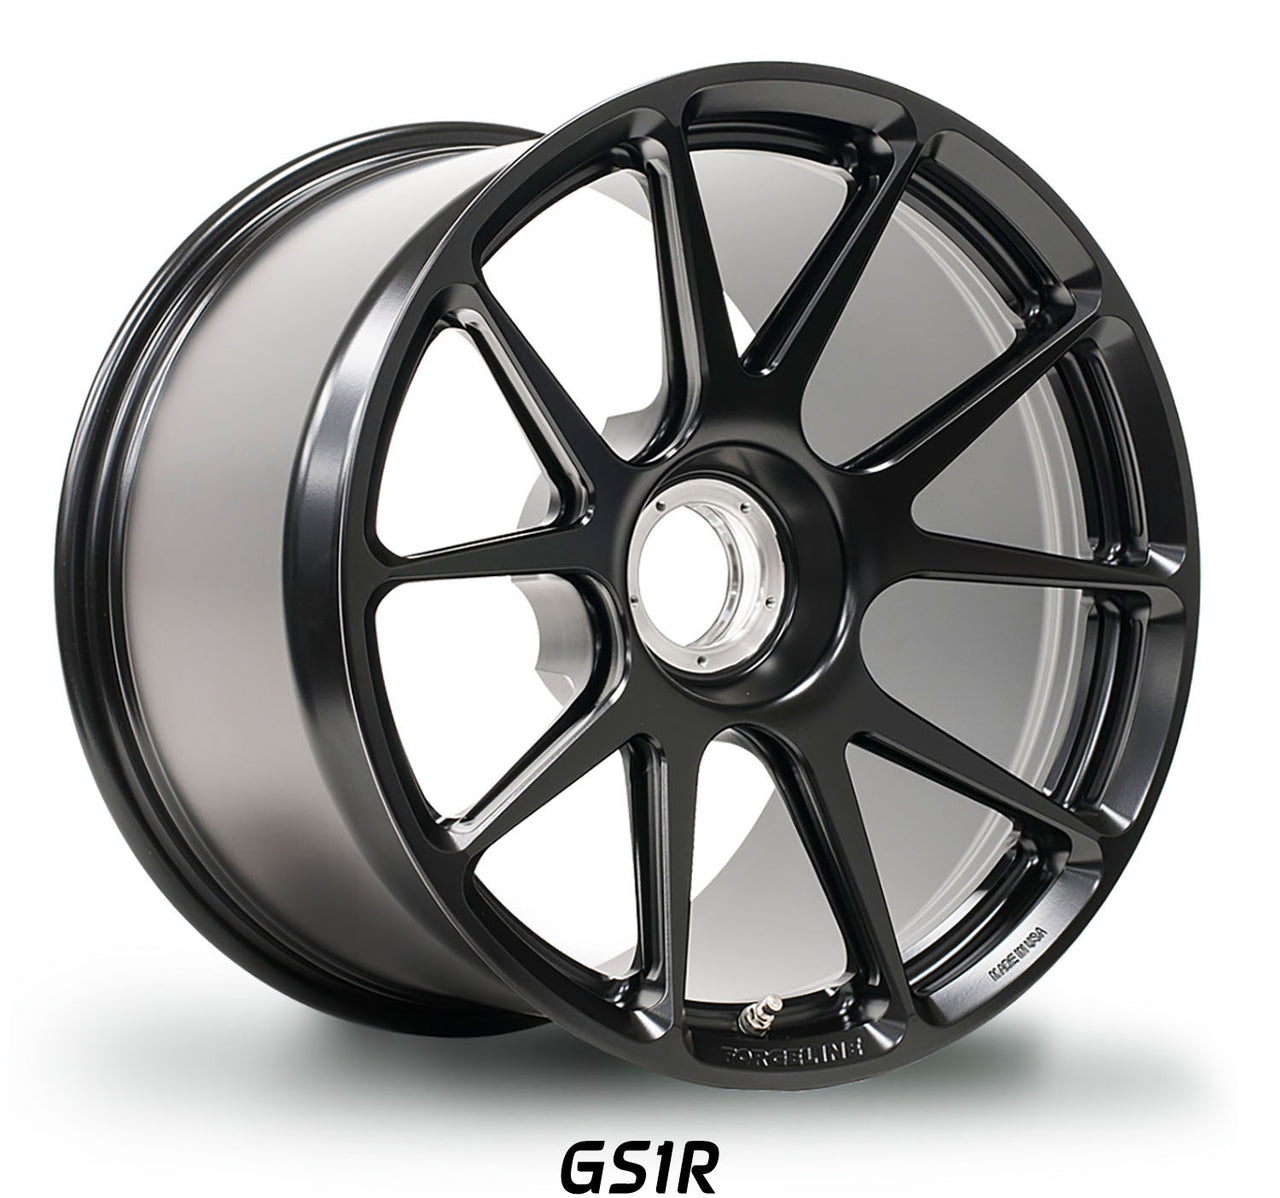 Satin Black Forgeline GS1R for centerlock Porsche 992 GT3 forged racing wheels for HPDE track days